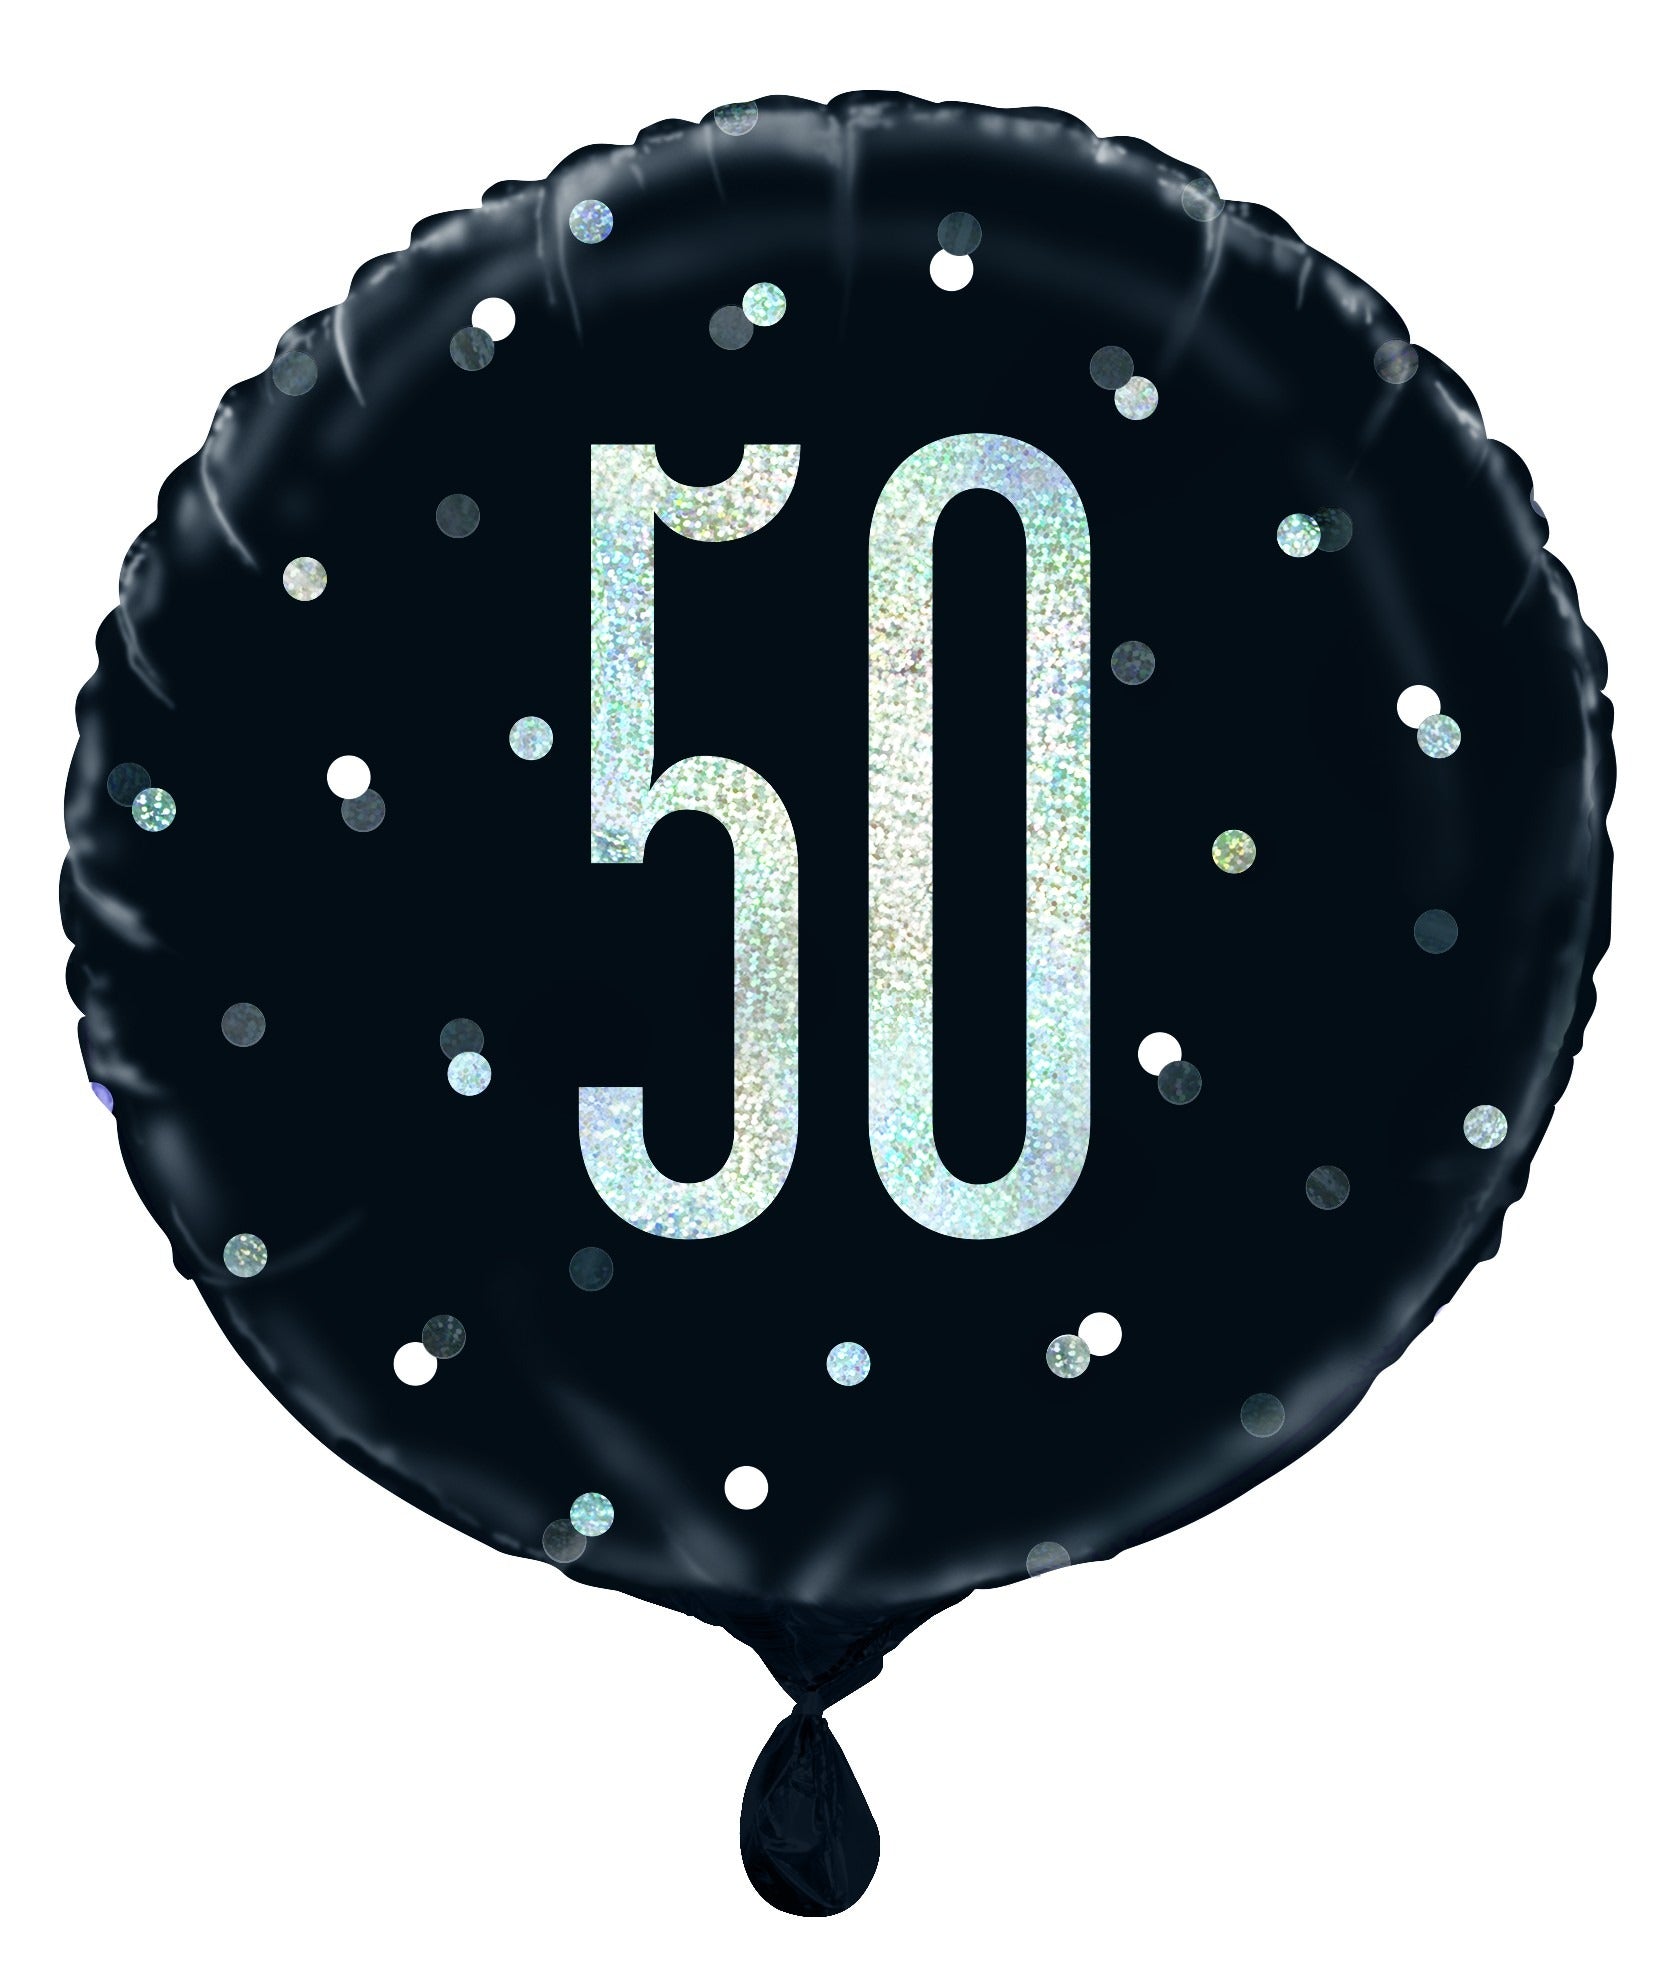 View Black and Silver Prismatic 50th Foil Balloon 18 Inch information